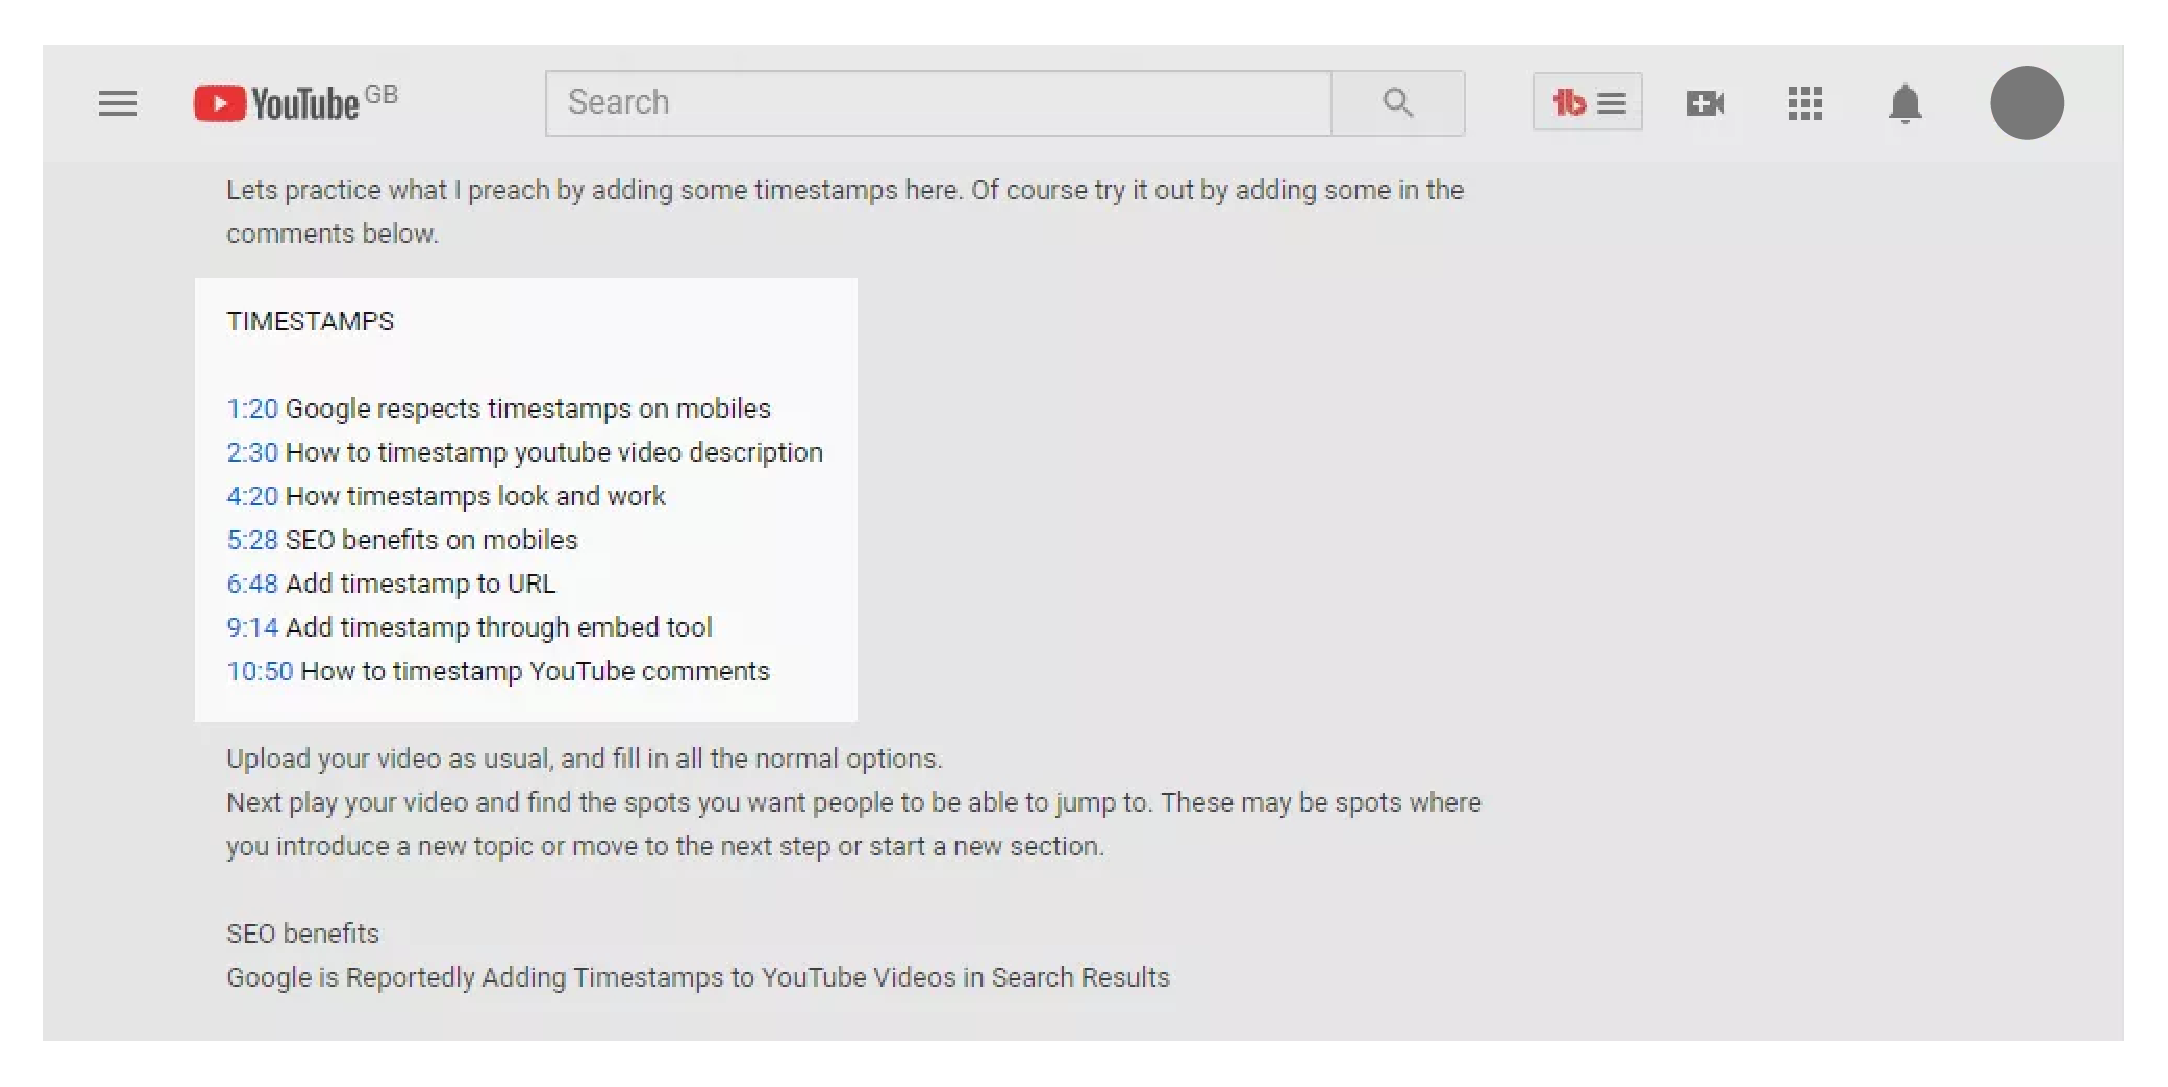 How to timestamp YouTube